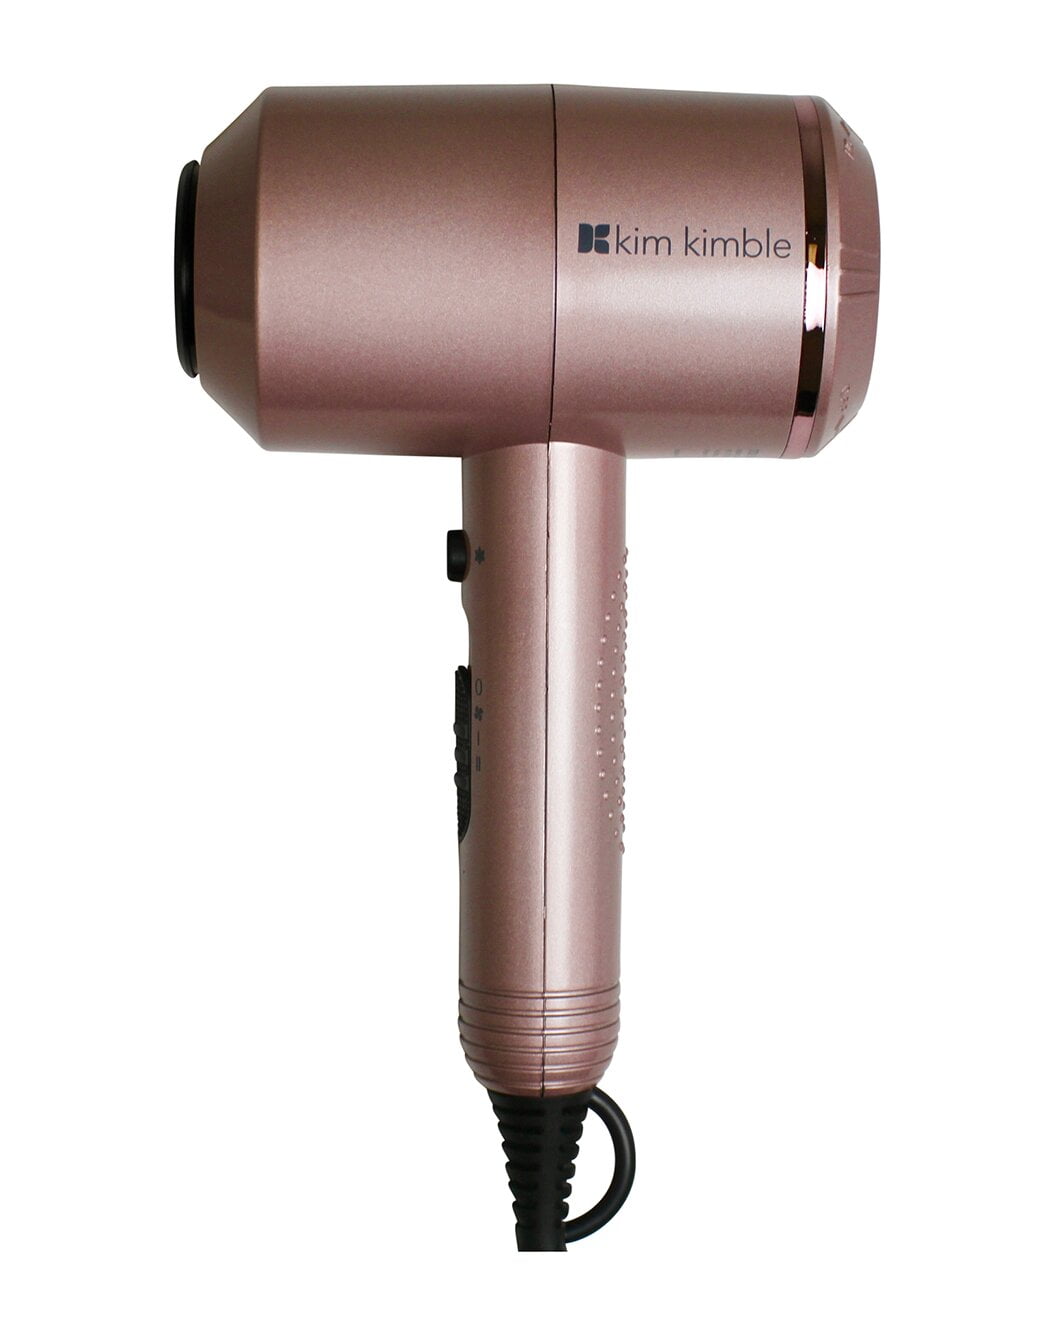 Kim Kimble blow dryer Direct air blow dryer Rose gold blow dryer Hair styling tool Professional blow dryer